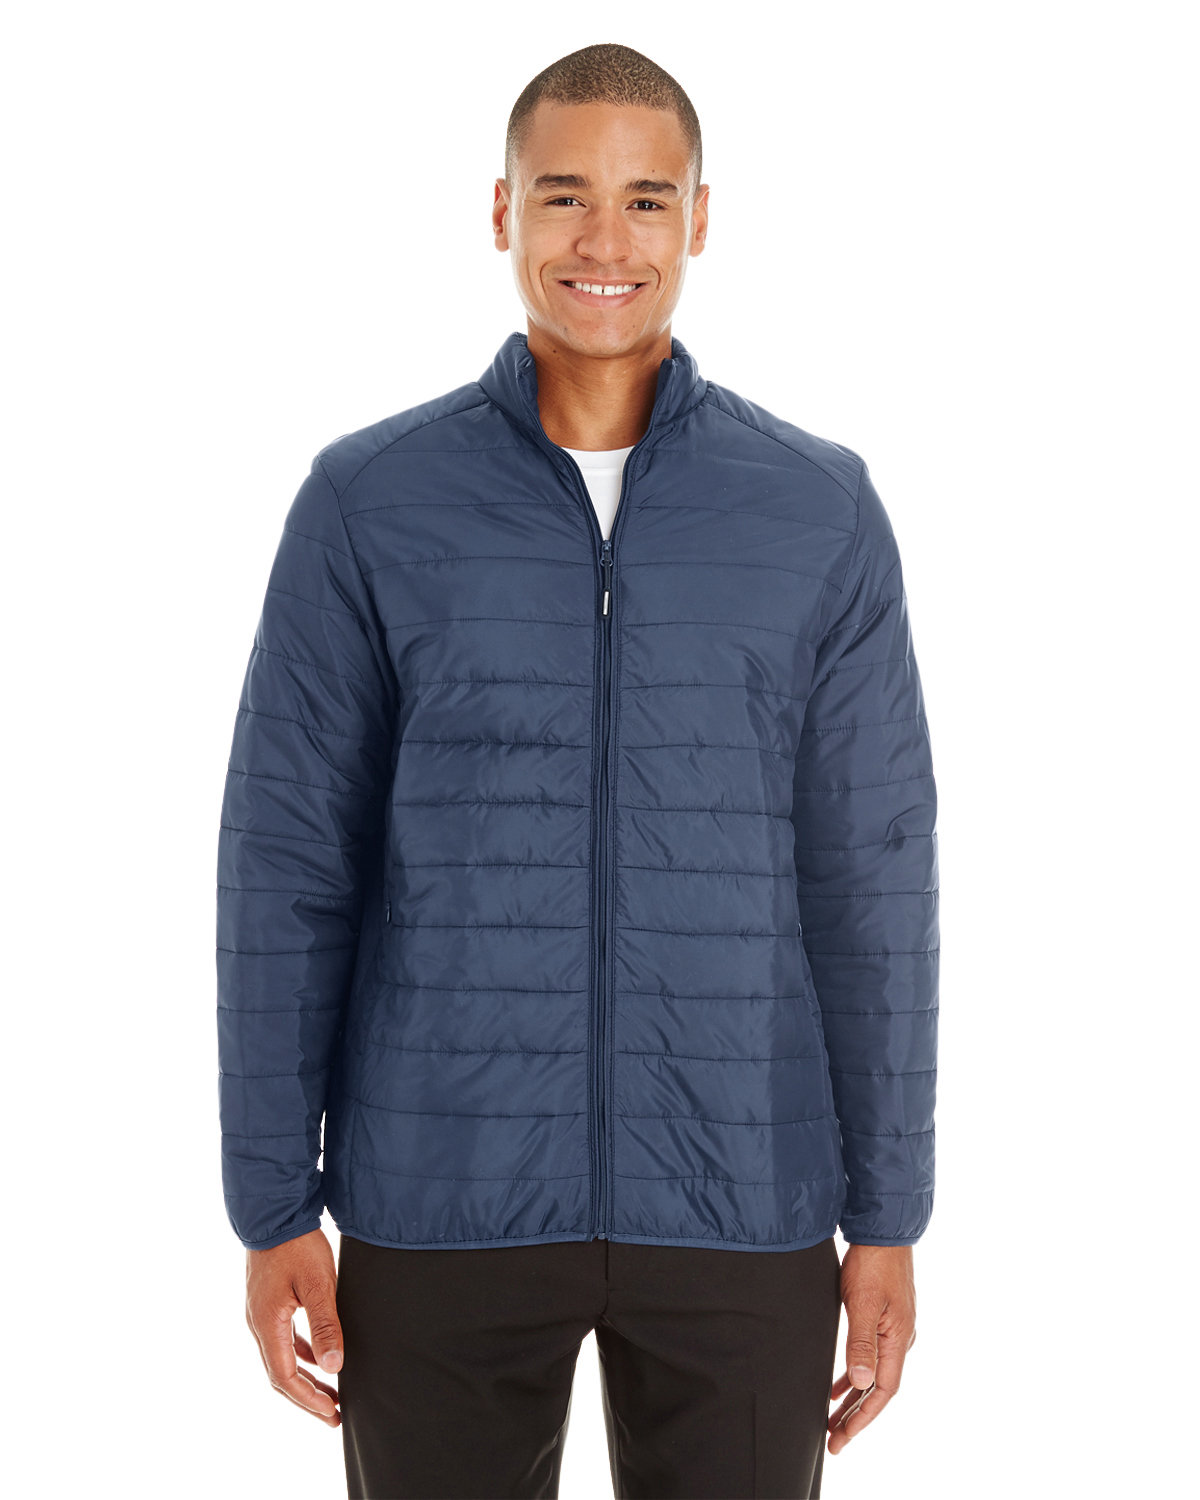 CORE365 Men's Tall Prevail Packable Puffer classic navy 